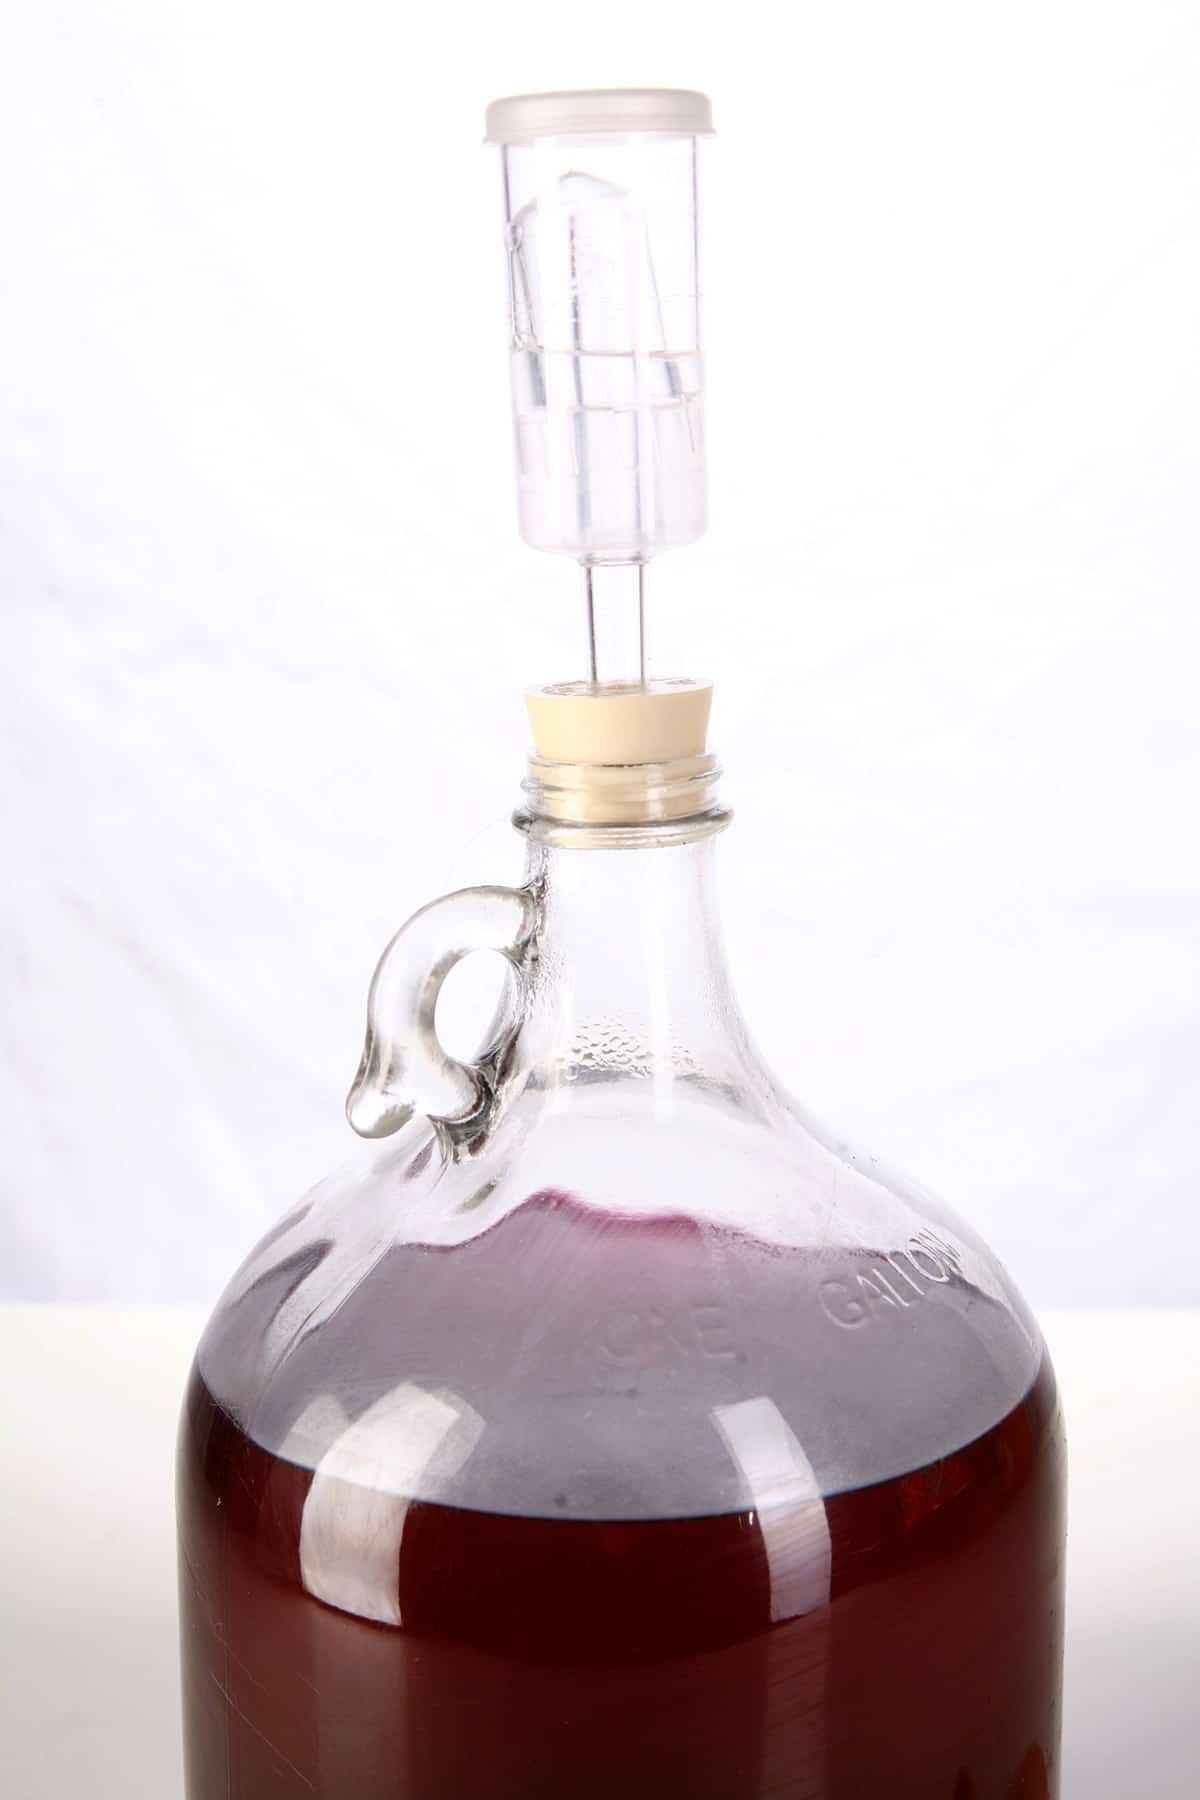 A glass carboy of homemade ube wine.